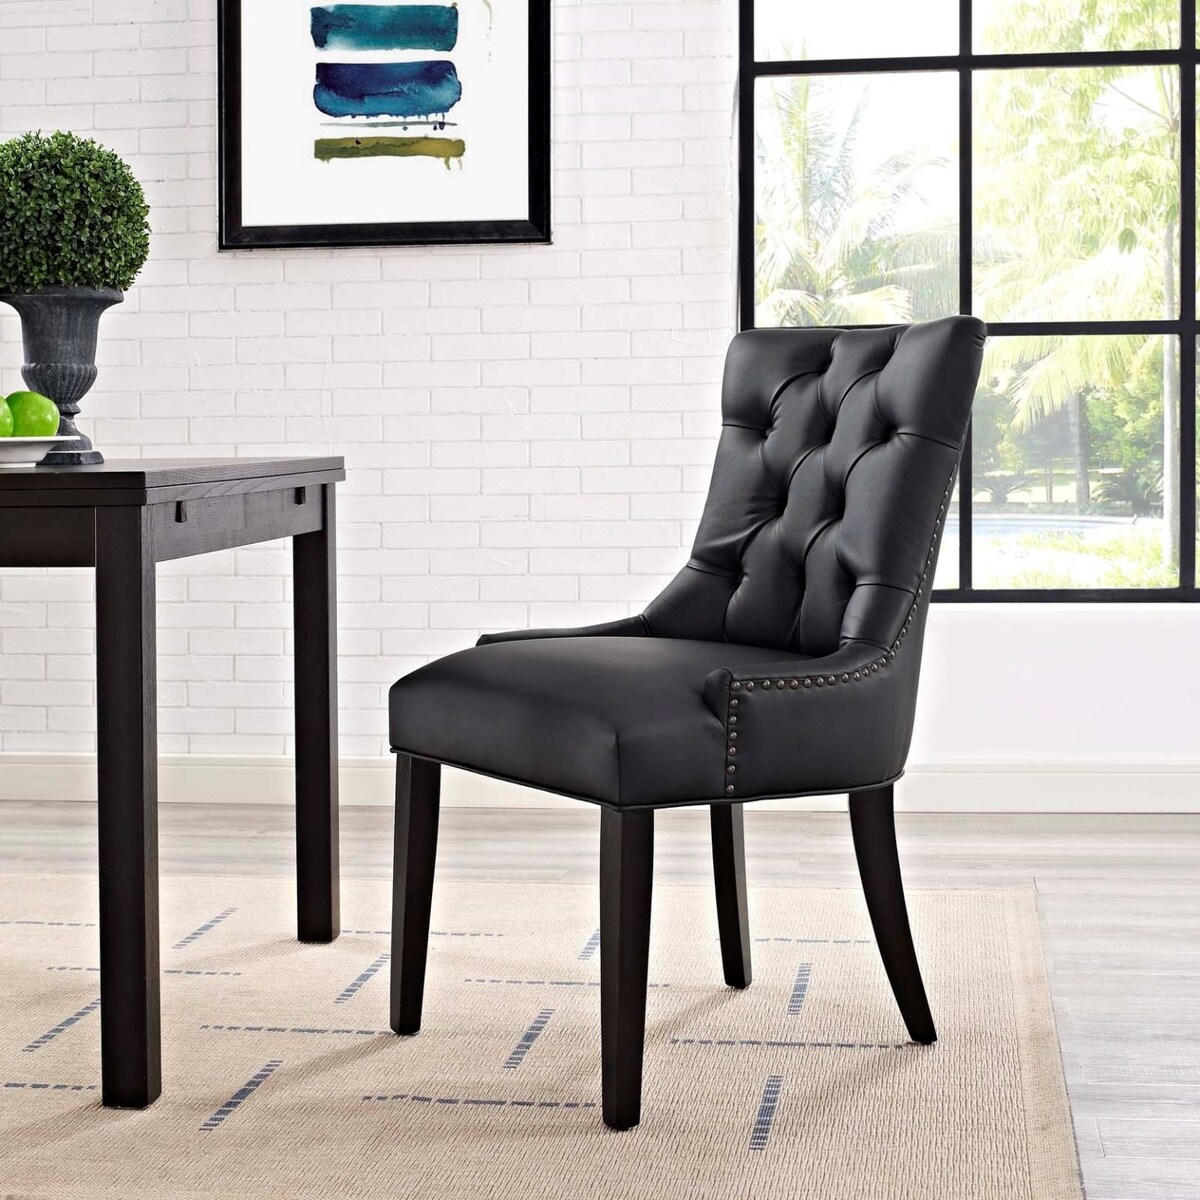 How To Clean Faux Leather Dining Chairs